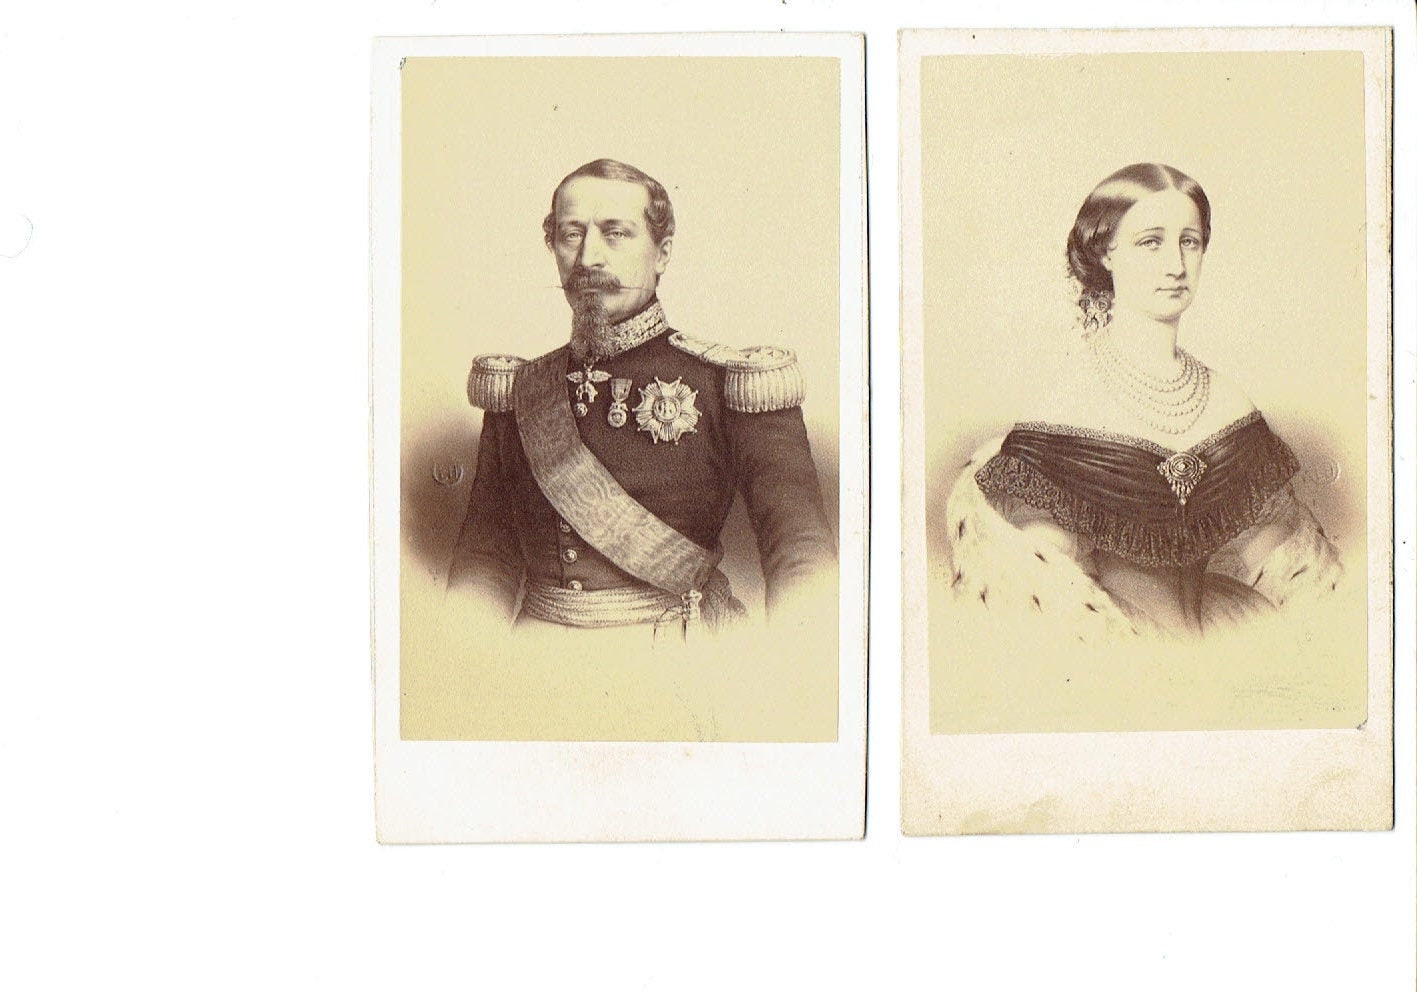 Image of Napoleon III and the Empress Eugenie of France, c 1865